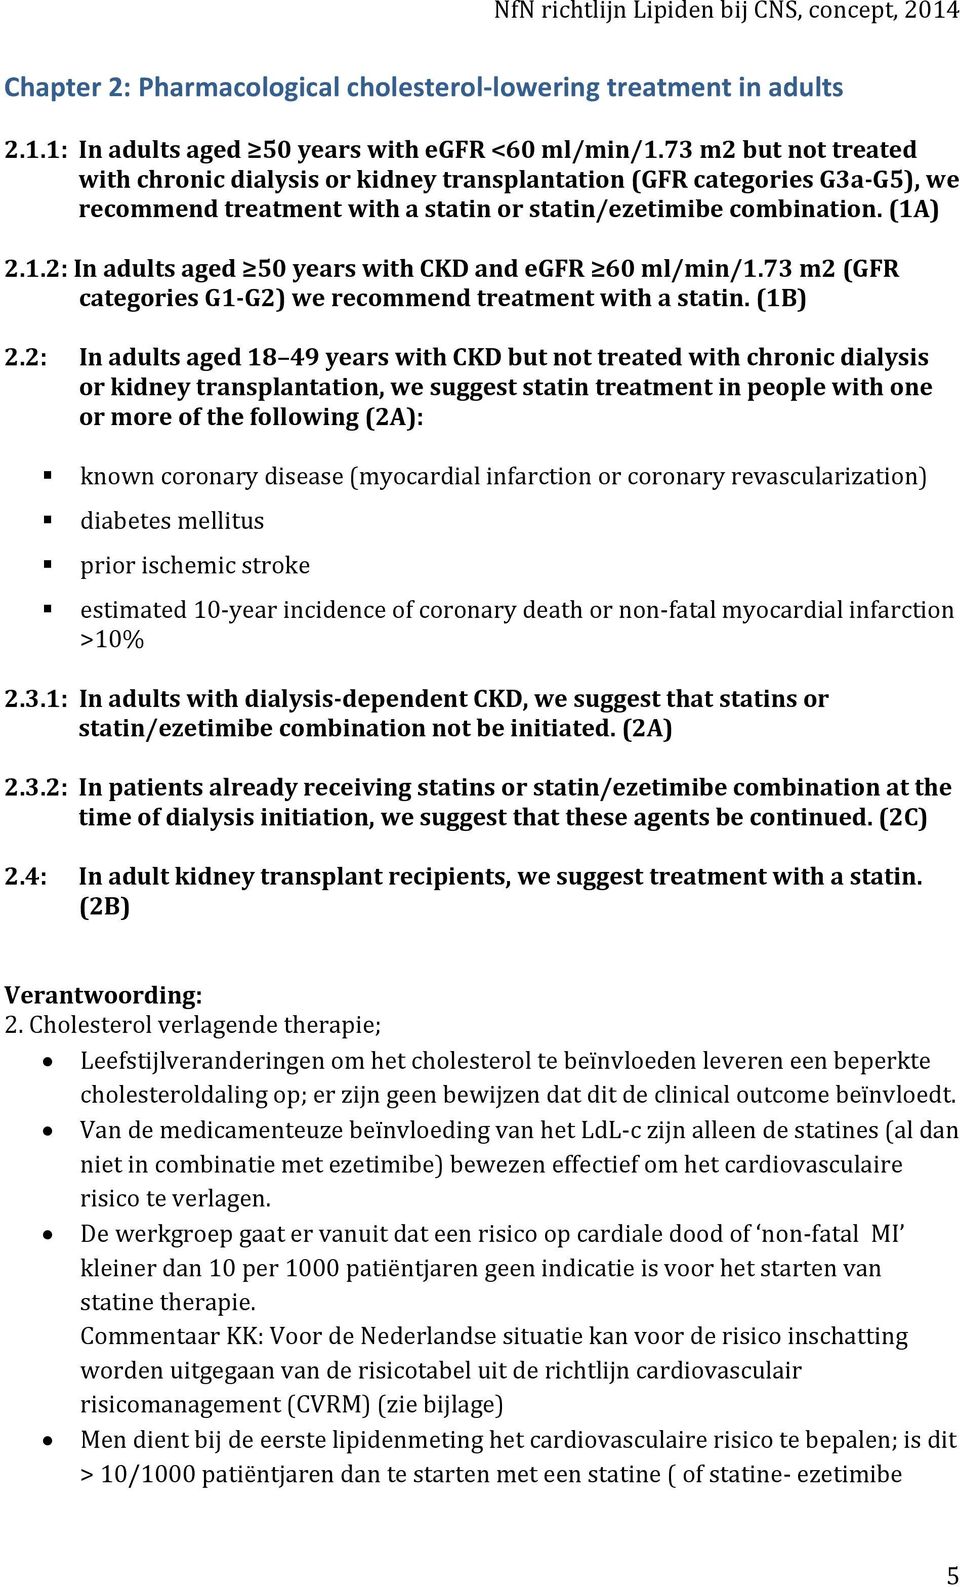 ) 2.1.2: In adults aged 50 years with CKD and egfr 60 ml/min/1.73 m2 (GFR categories G1-G2) we recommend treatment with a statin. (1B) 2.